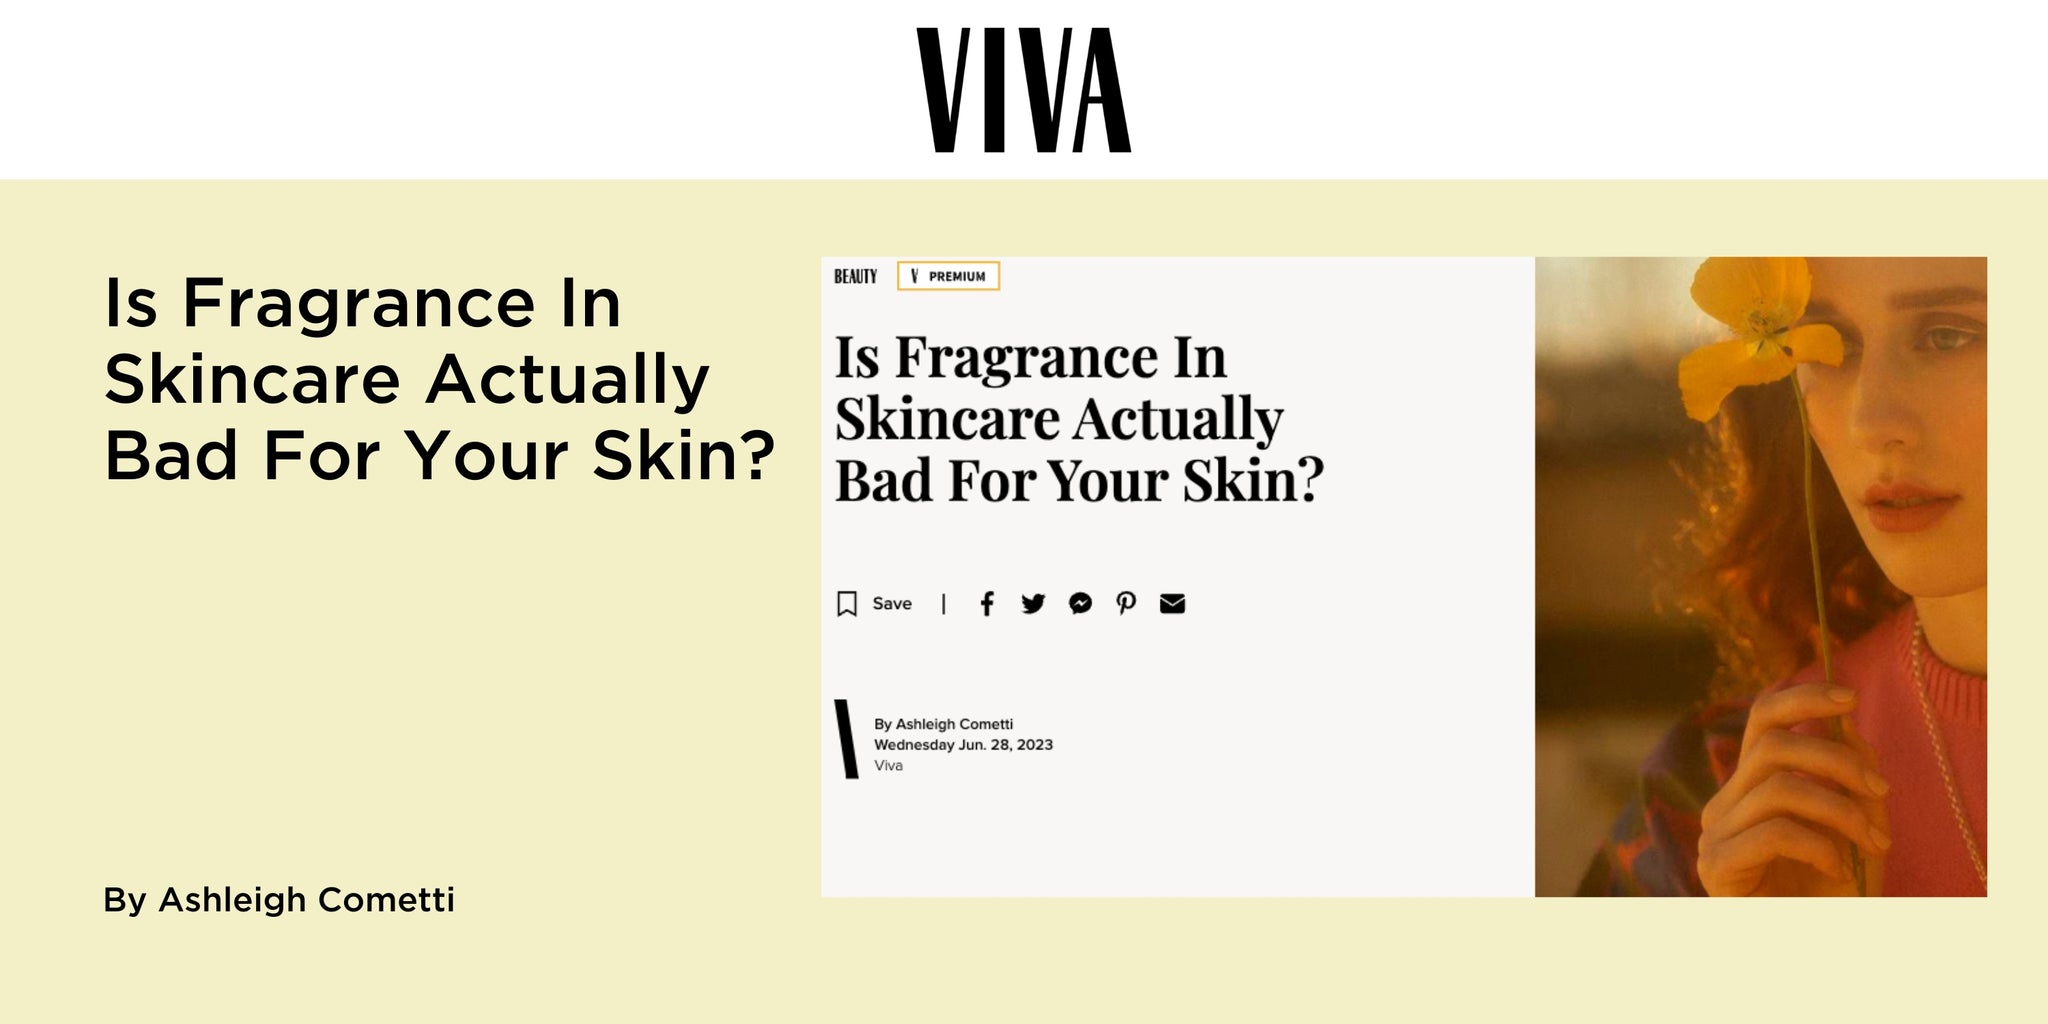 Is Fragrance In Skincare Actually Bad For Your Skin?